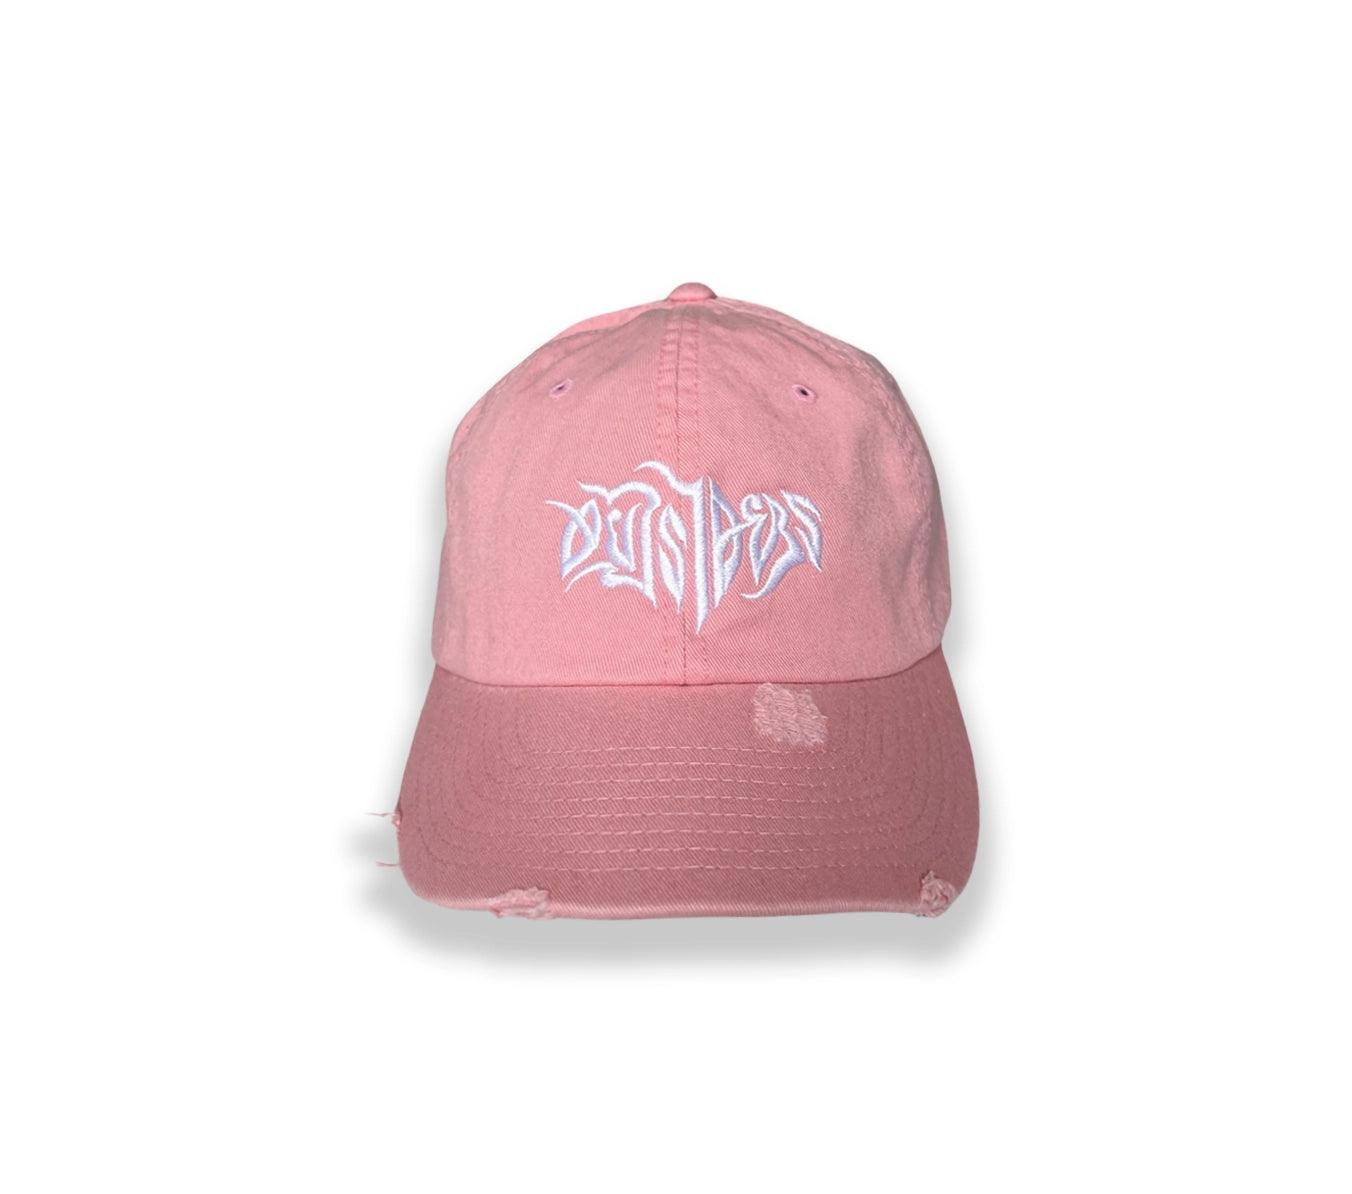 Superconscious Outsiders Cap - Pink/White - One size - Caps